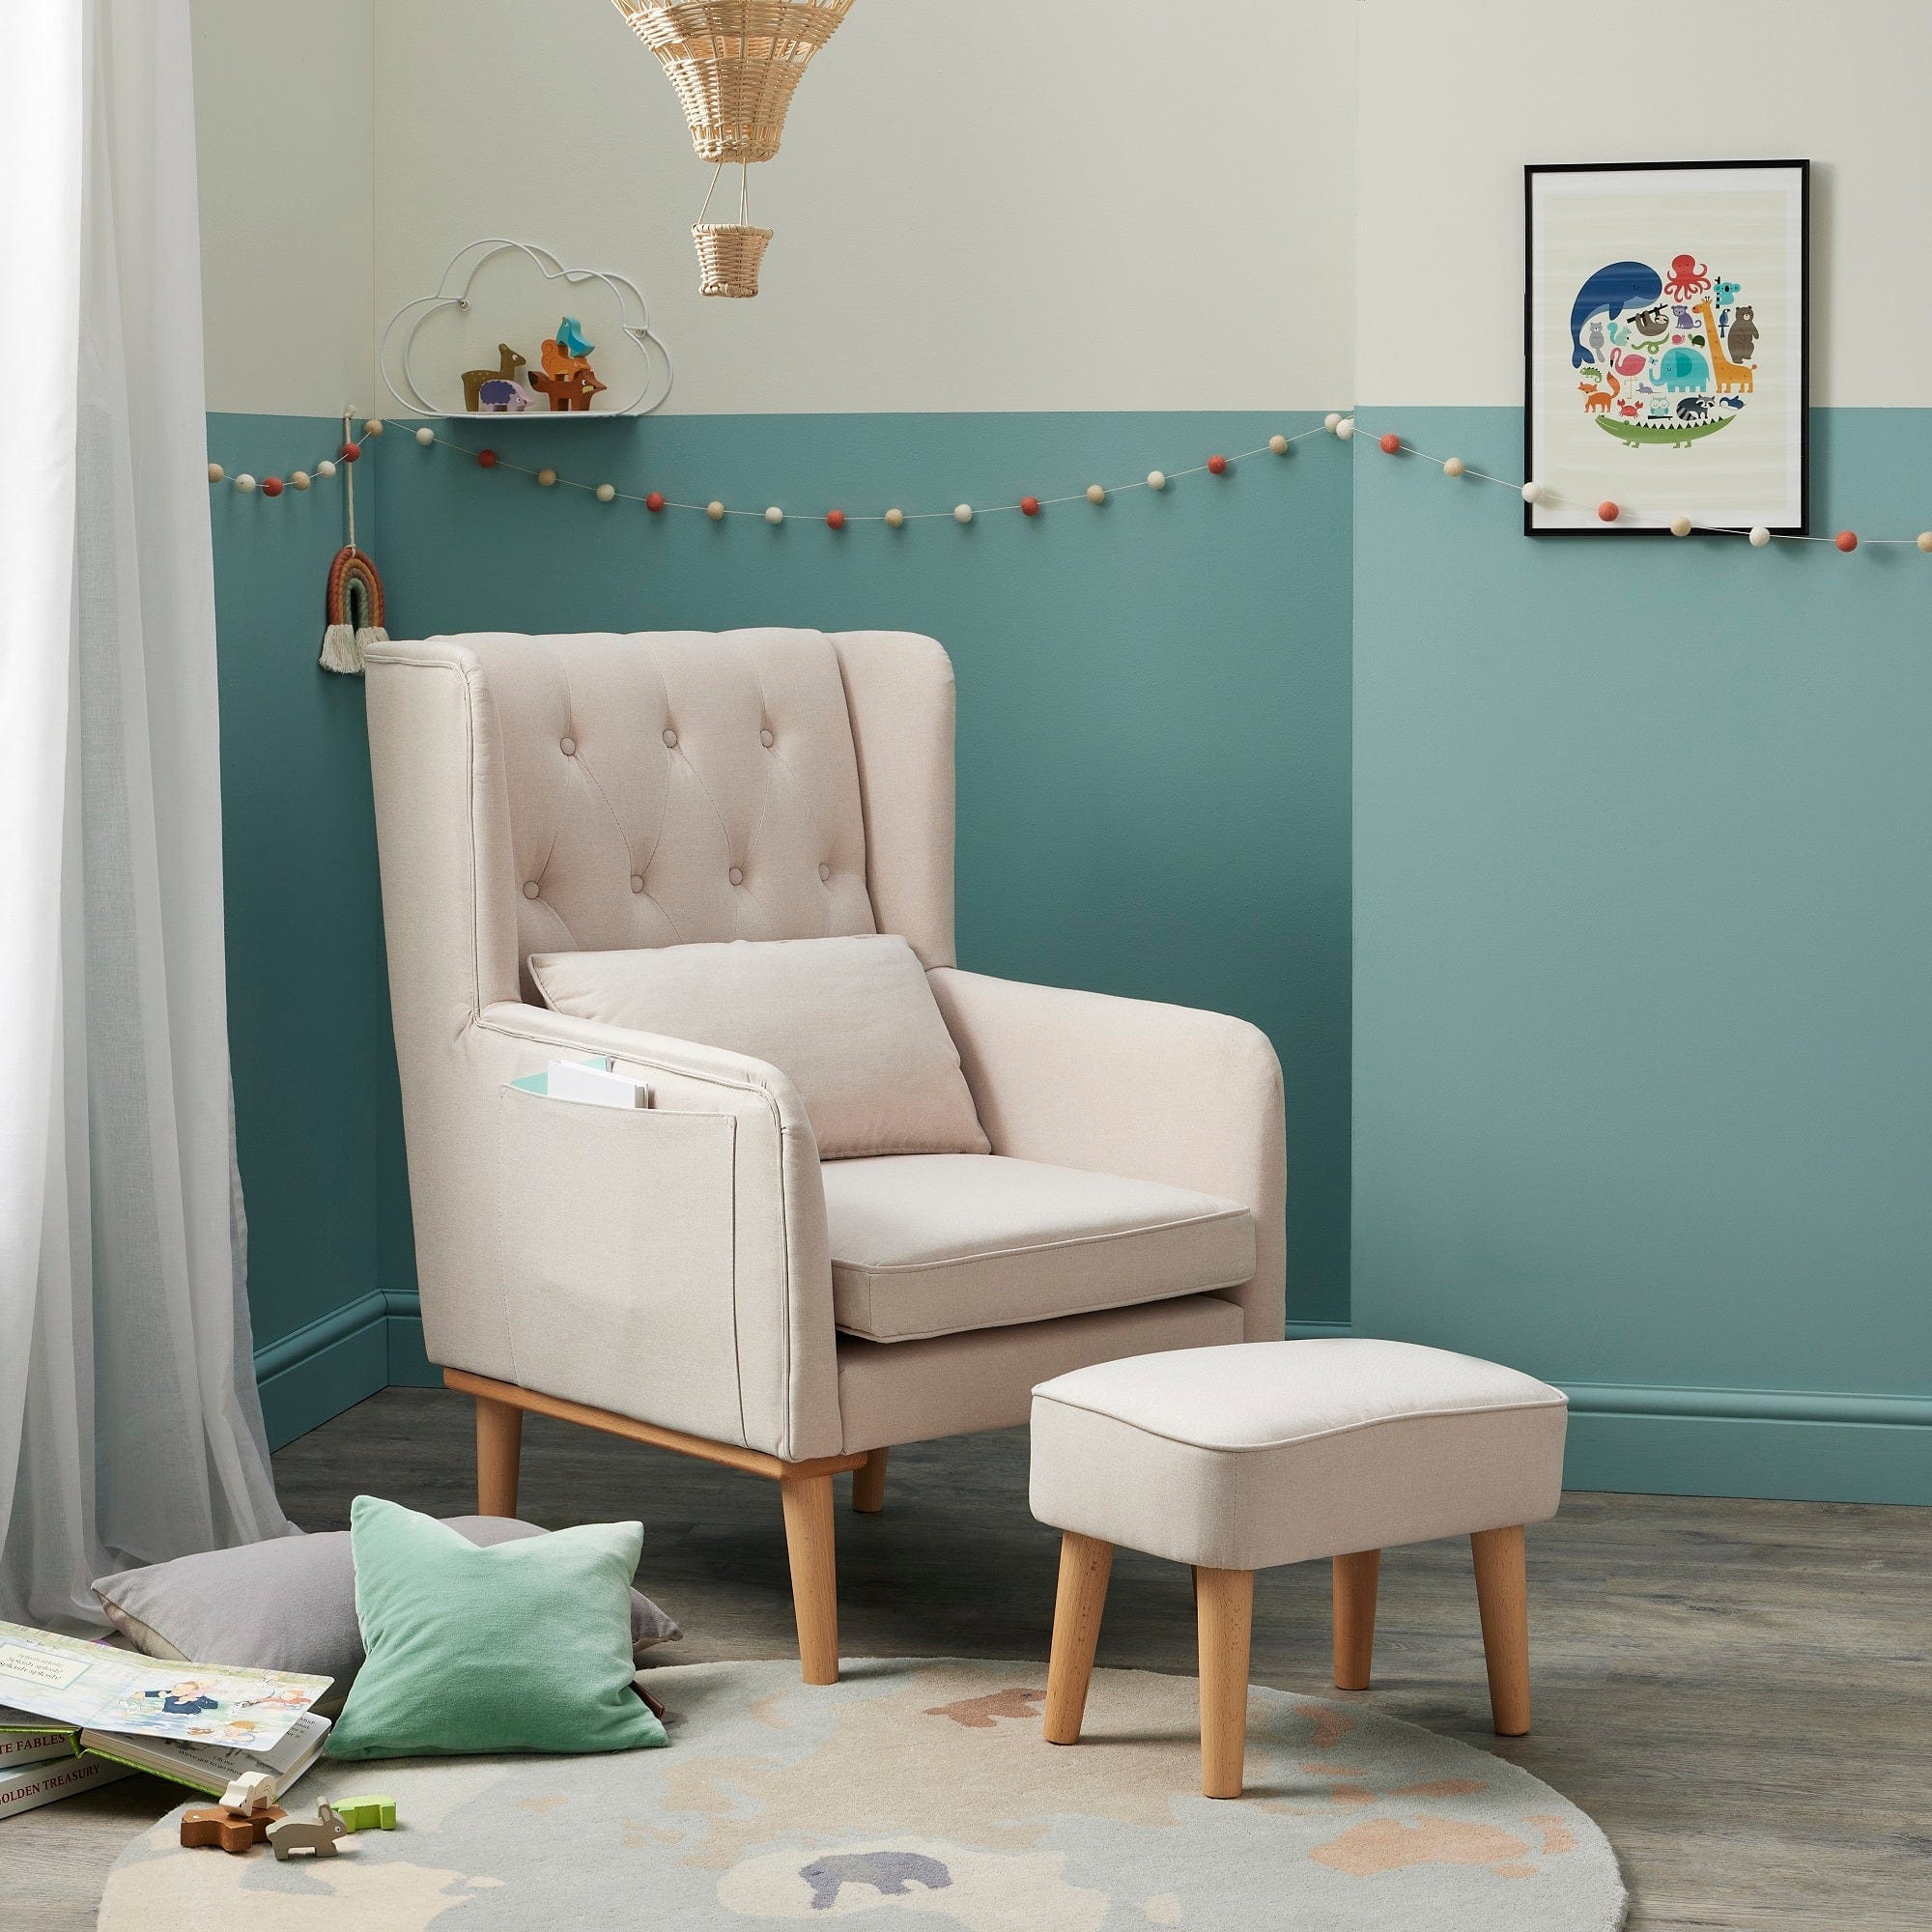 Babymore Lux Nursing Chair with Stool - Cream – UK Baby Centre